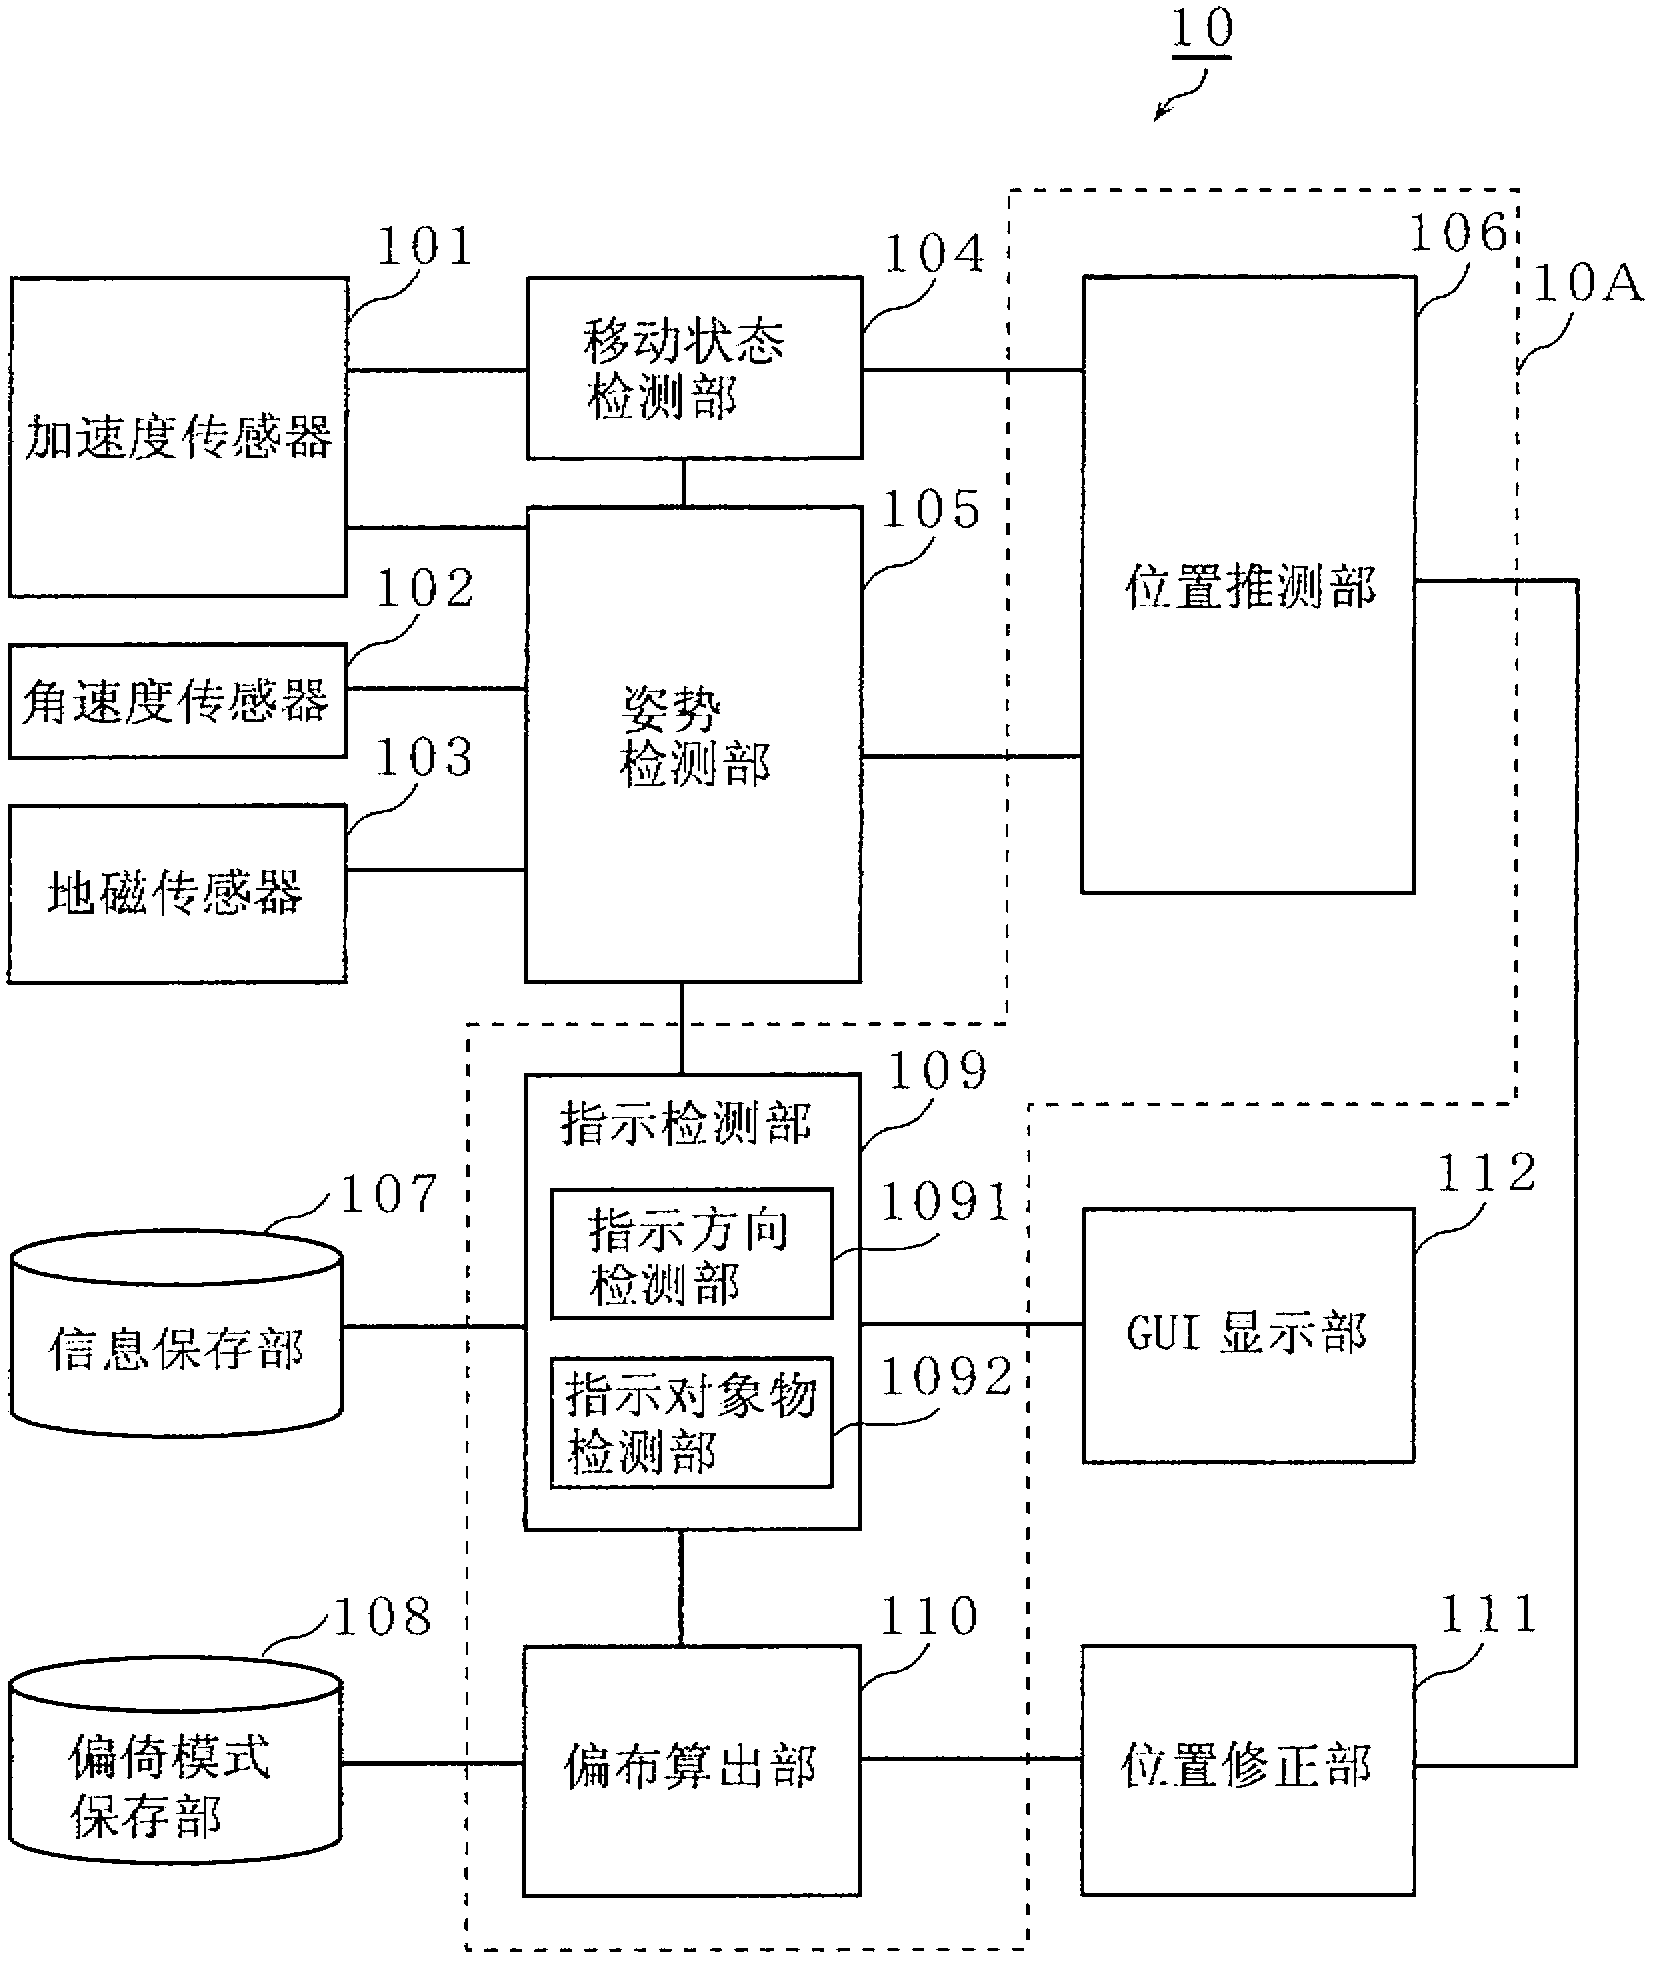 Position estimation device, position estimation method, and integrated circuit